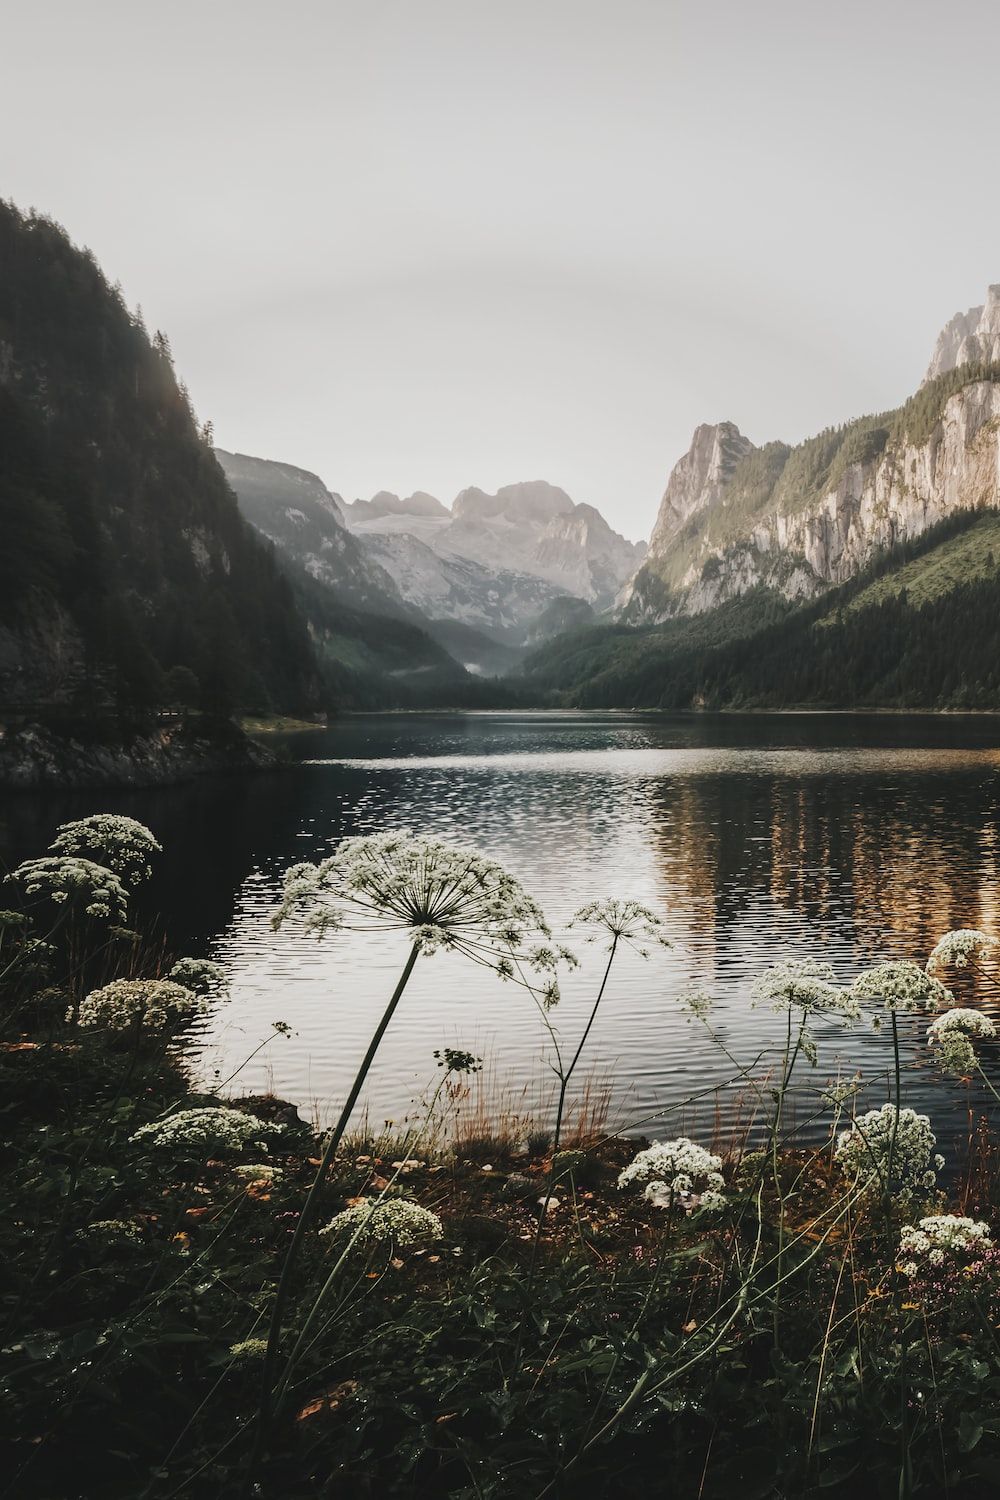 A lake surrounded by mountains with a flower in the foreground. - Lake